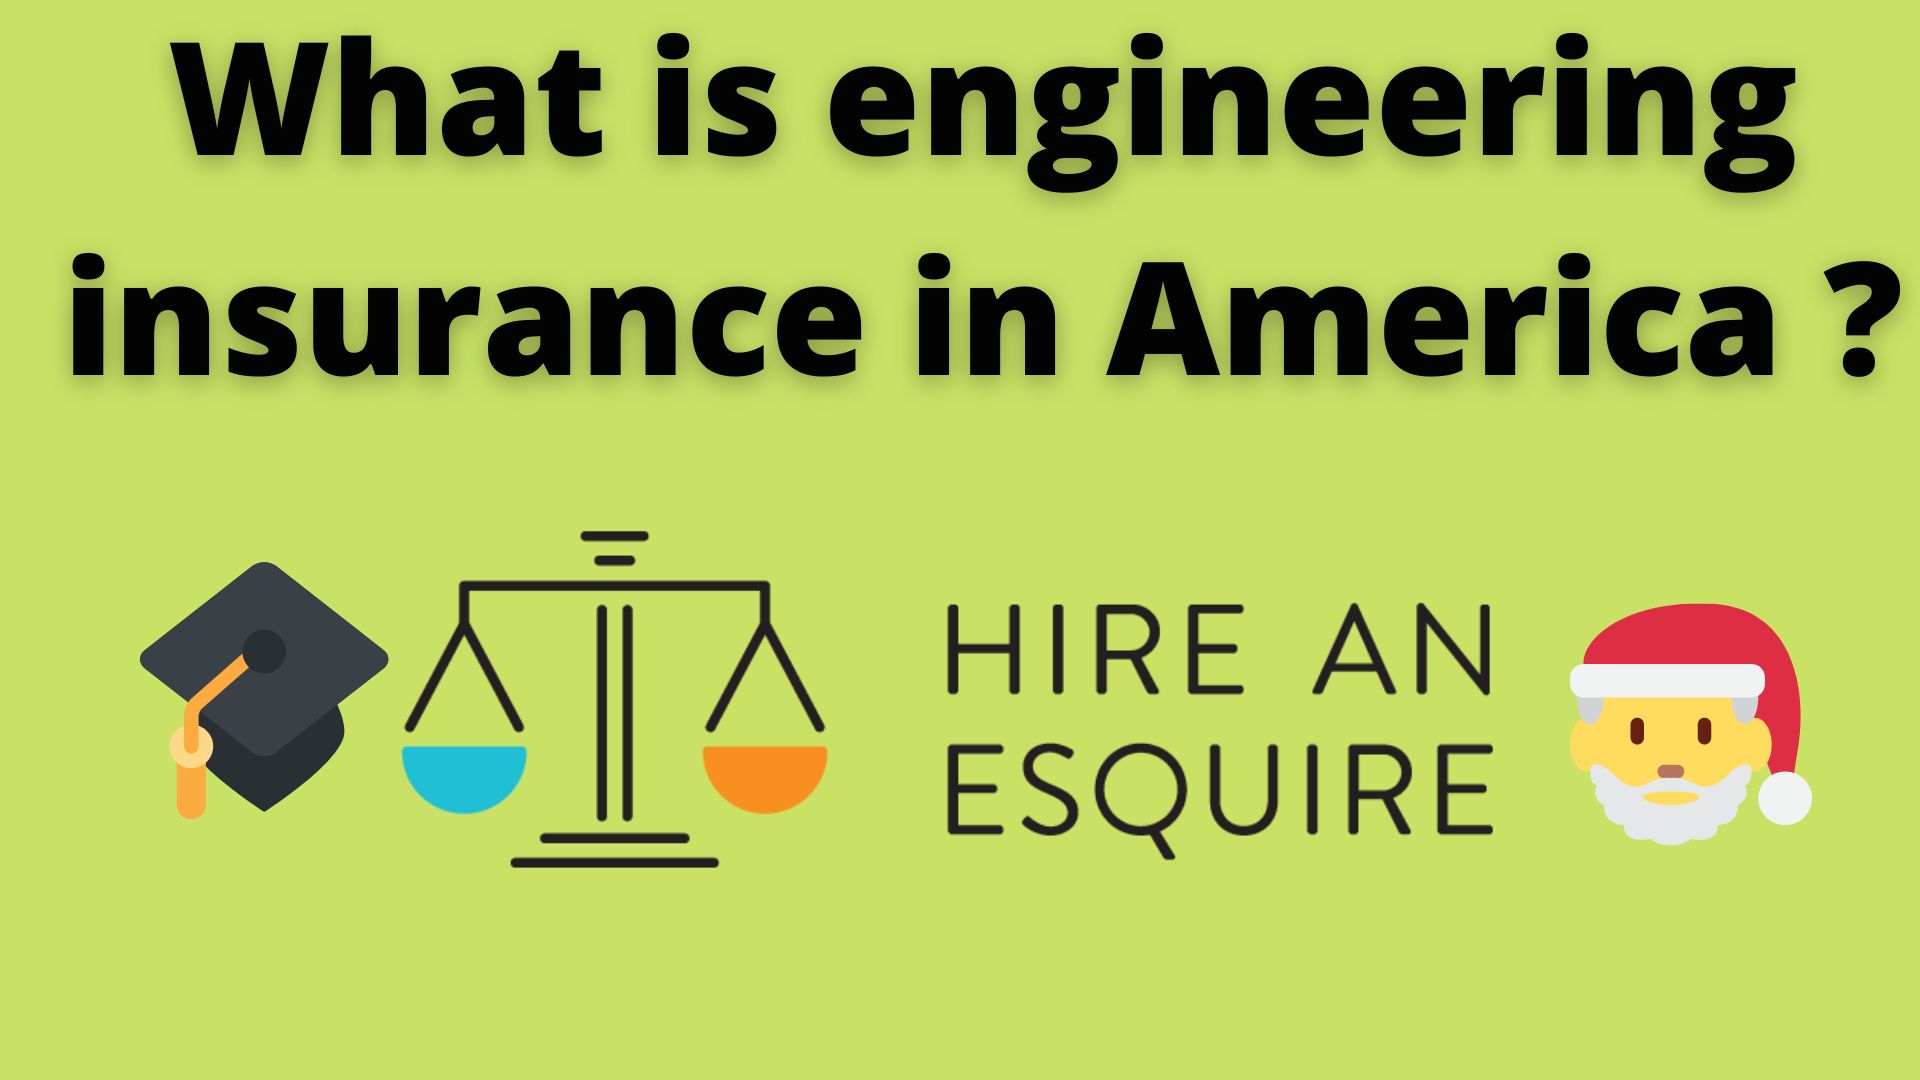 What is engineering insurance in america?